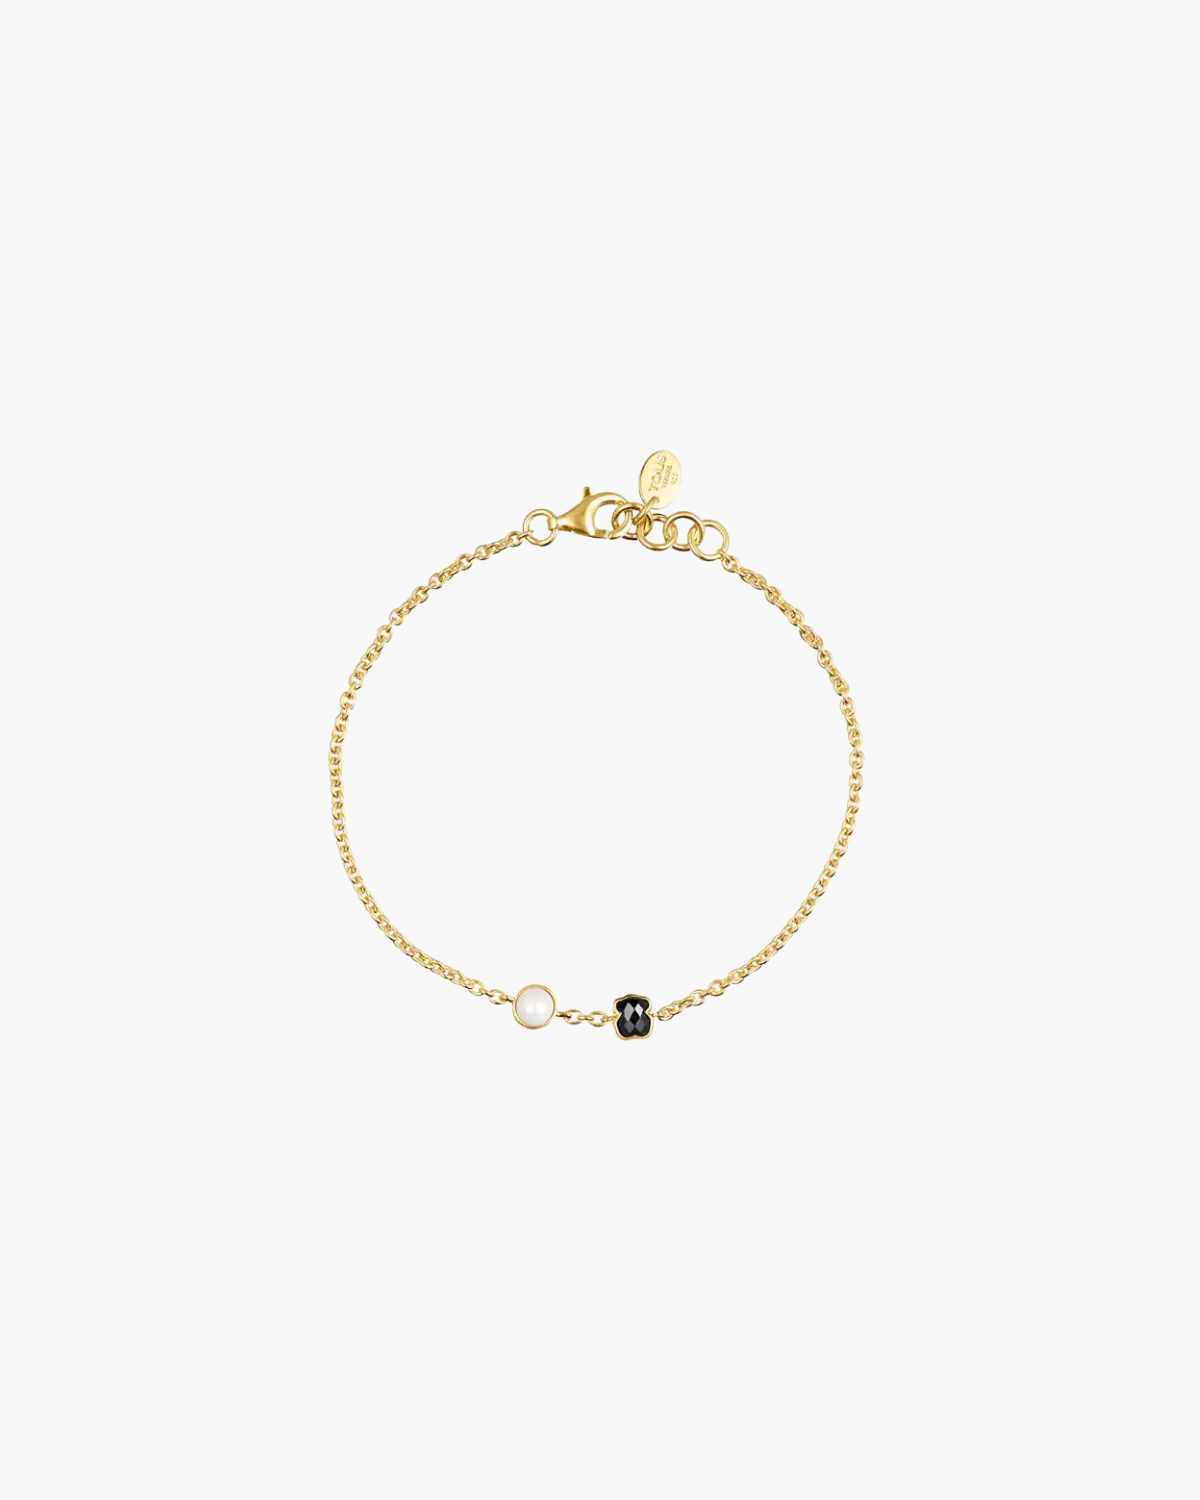 Glory Bracelet in Silver Vermeil with Onyx and Pearl – Gallery od